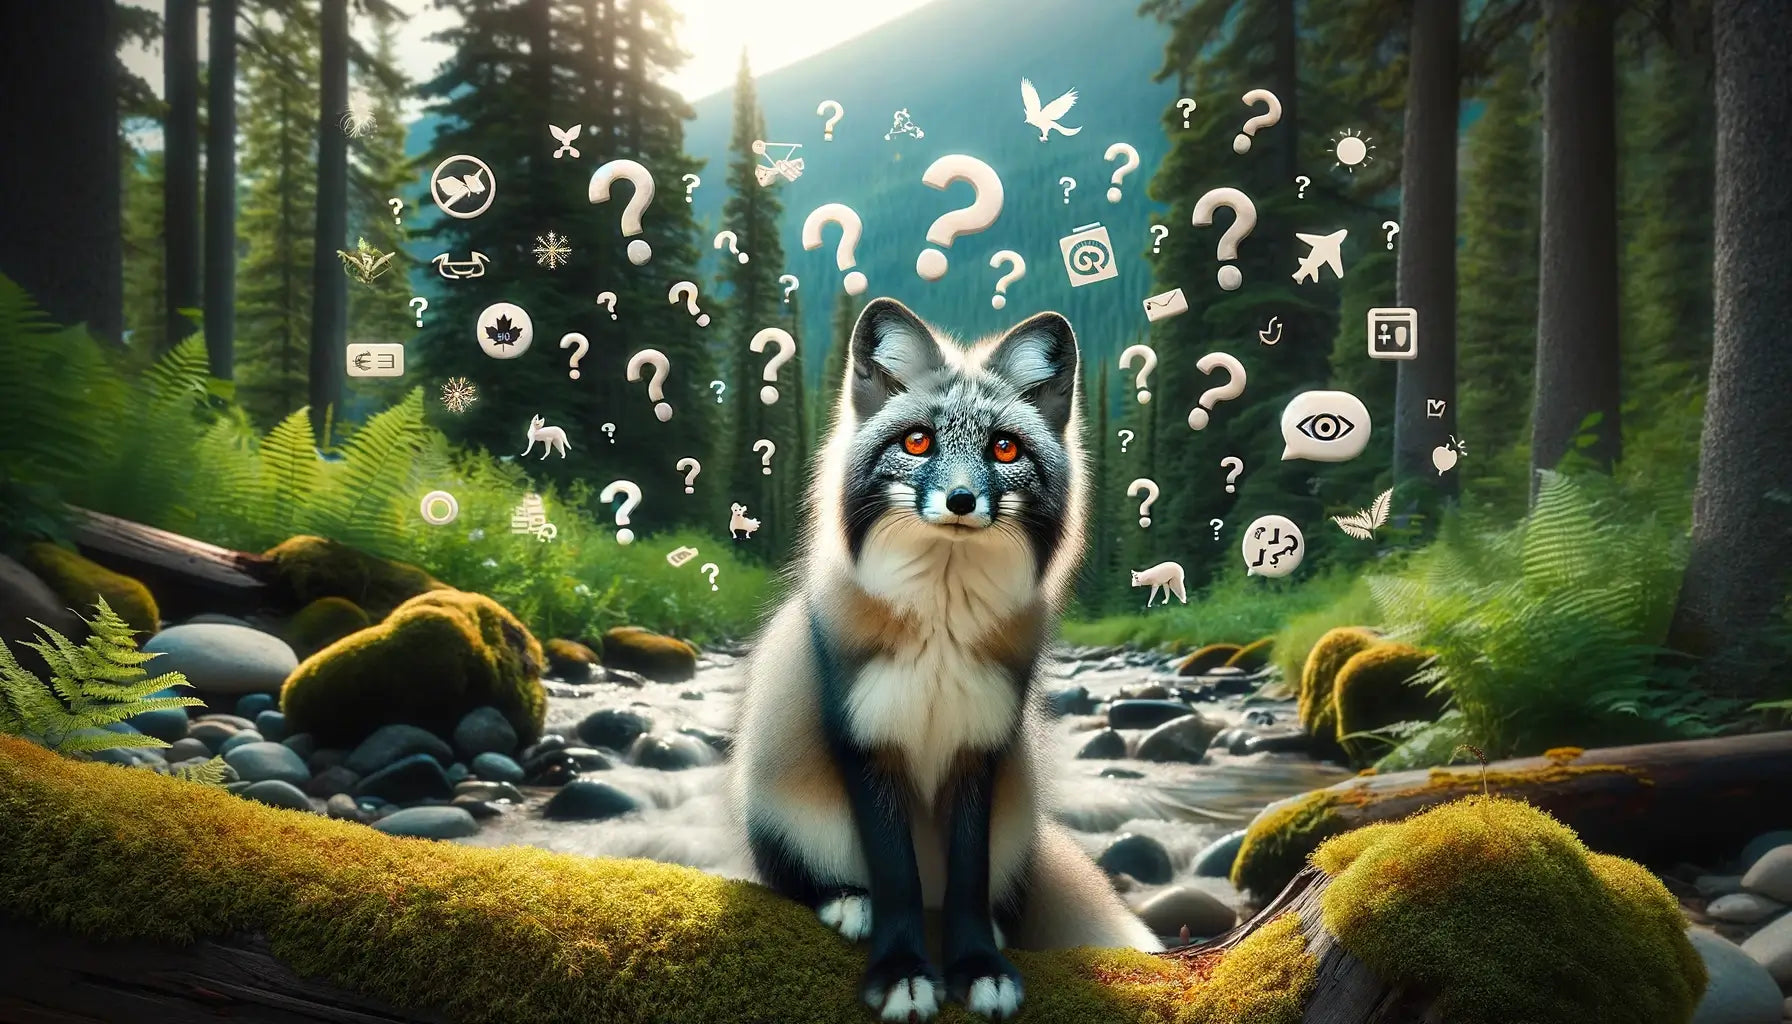 A Canadian marble fox surrounded by symbolic question marks and icons representing common inquiries about the species, set in its natural environment.